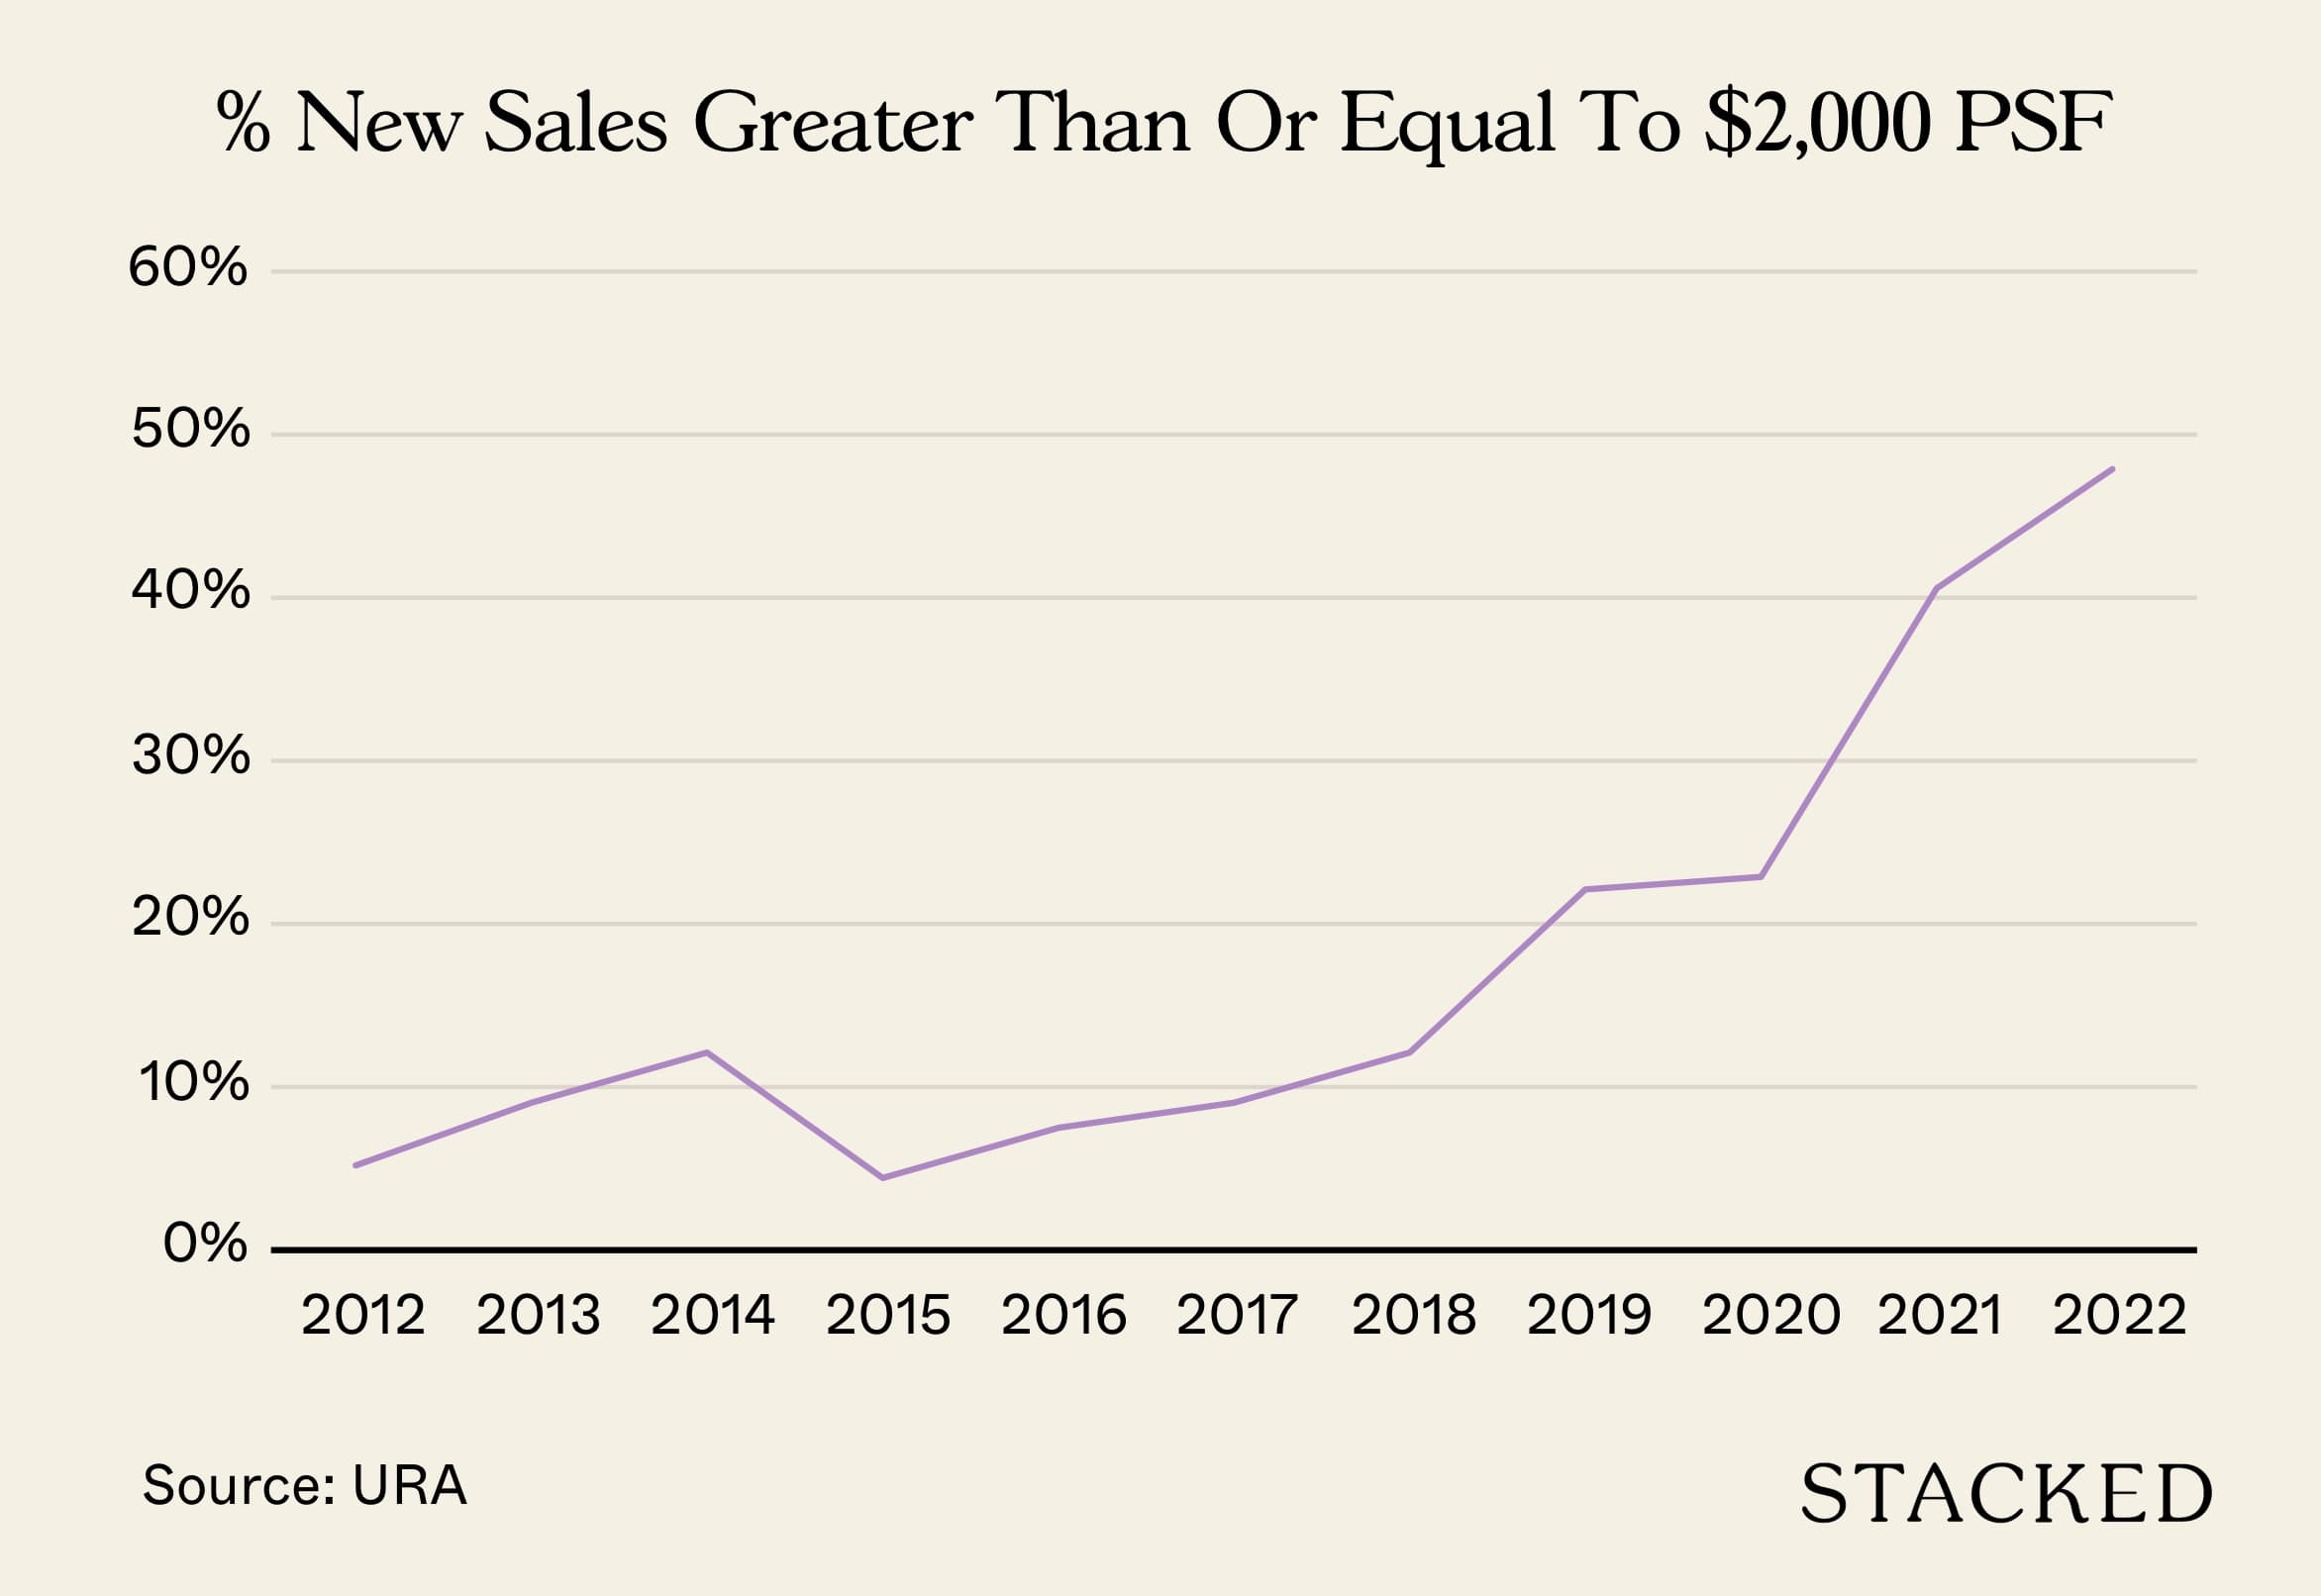 New Sales Greater Than Or Equal To 2000 PSF